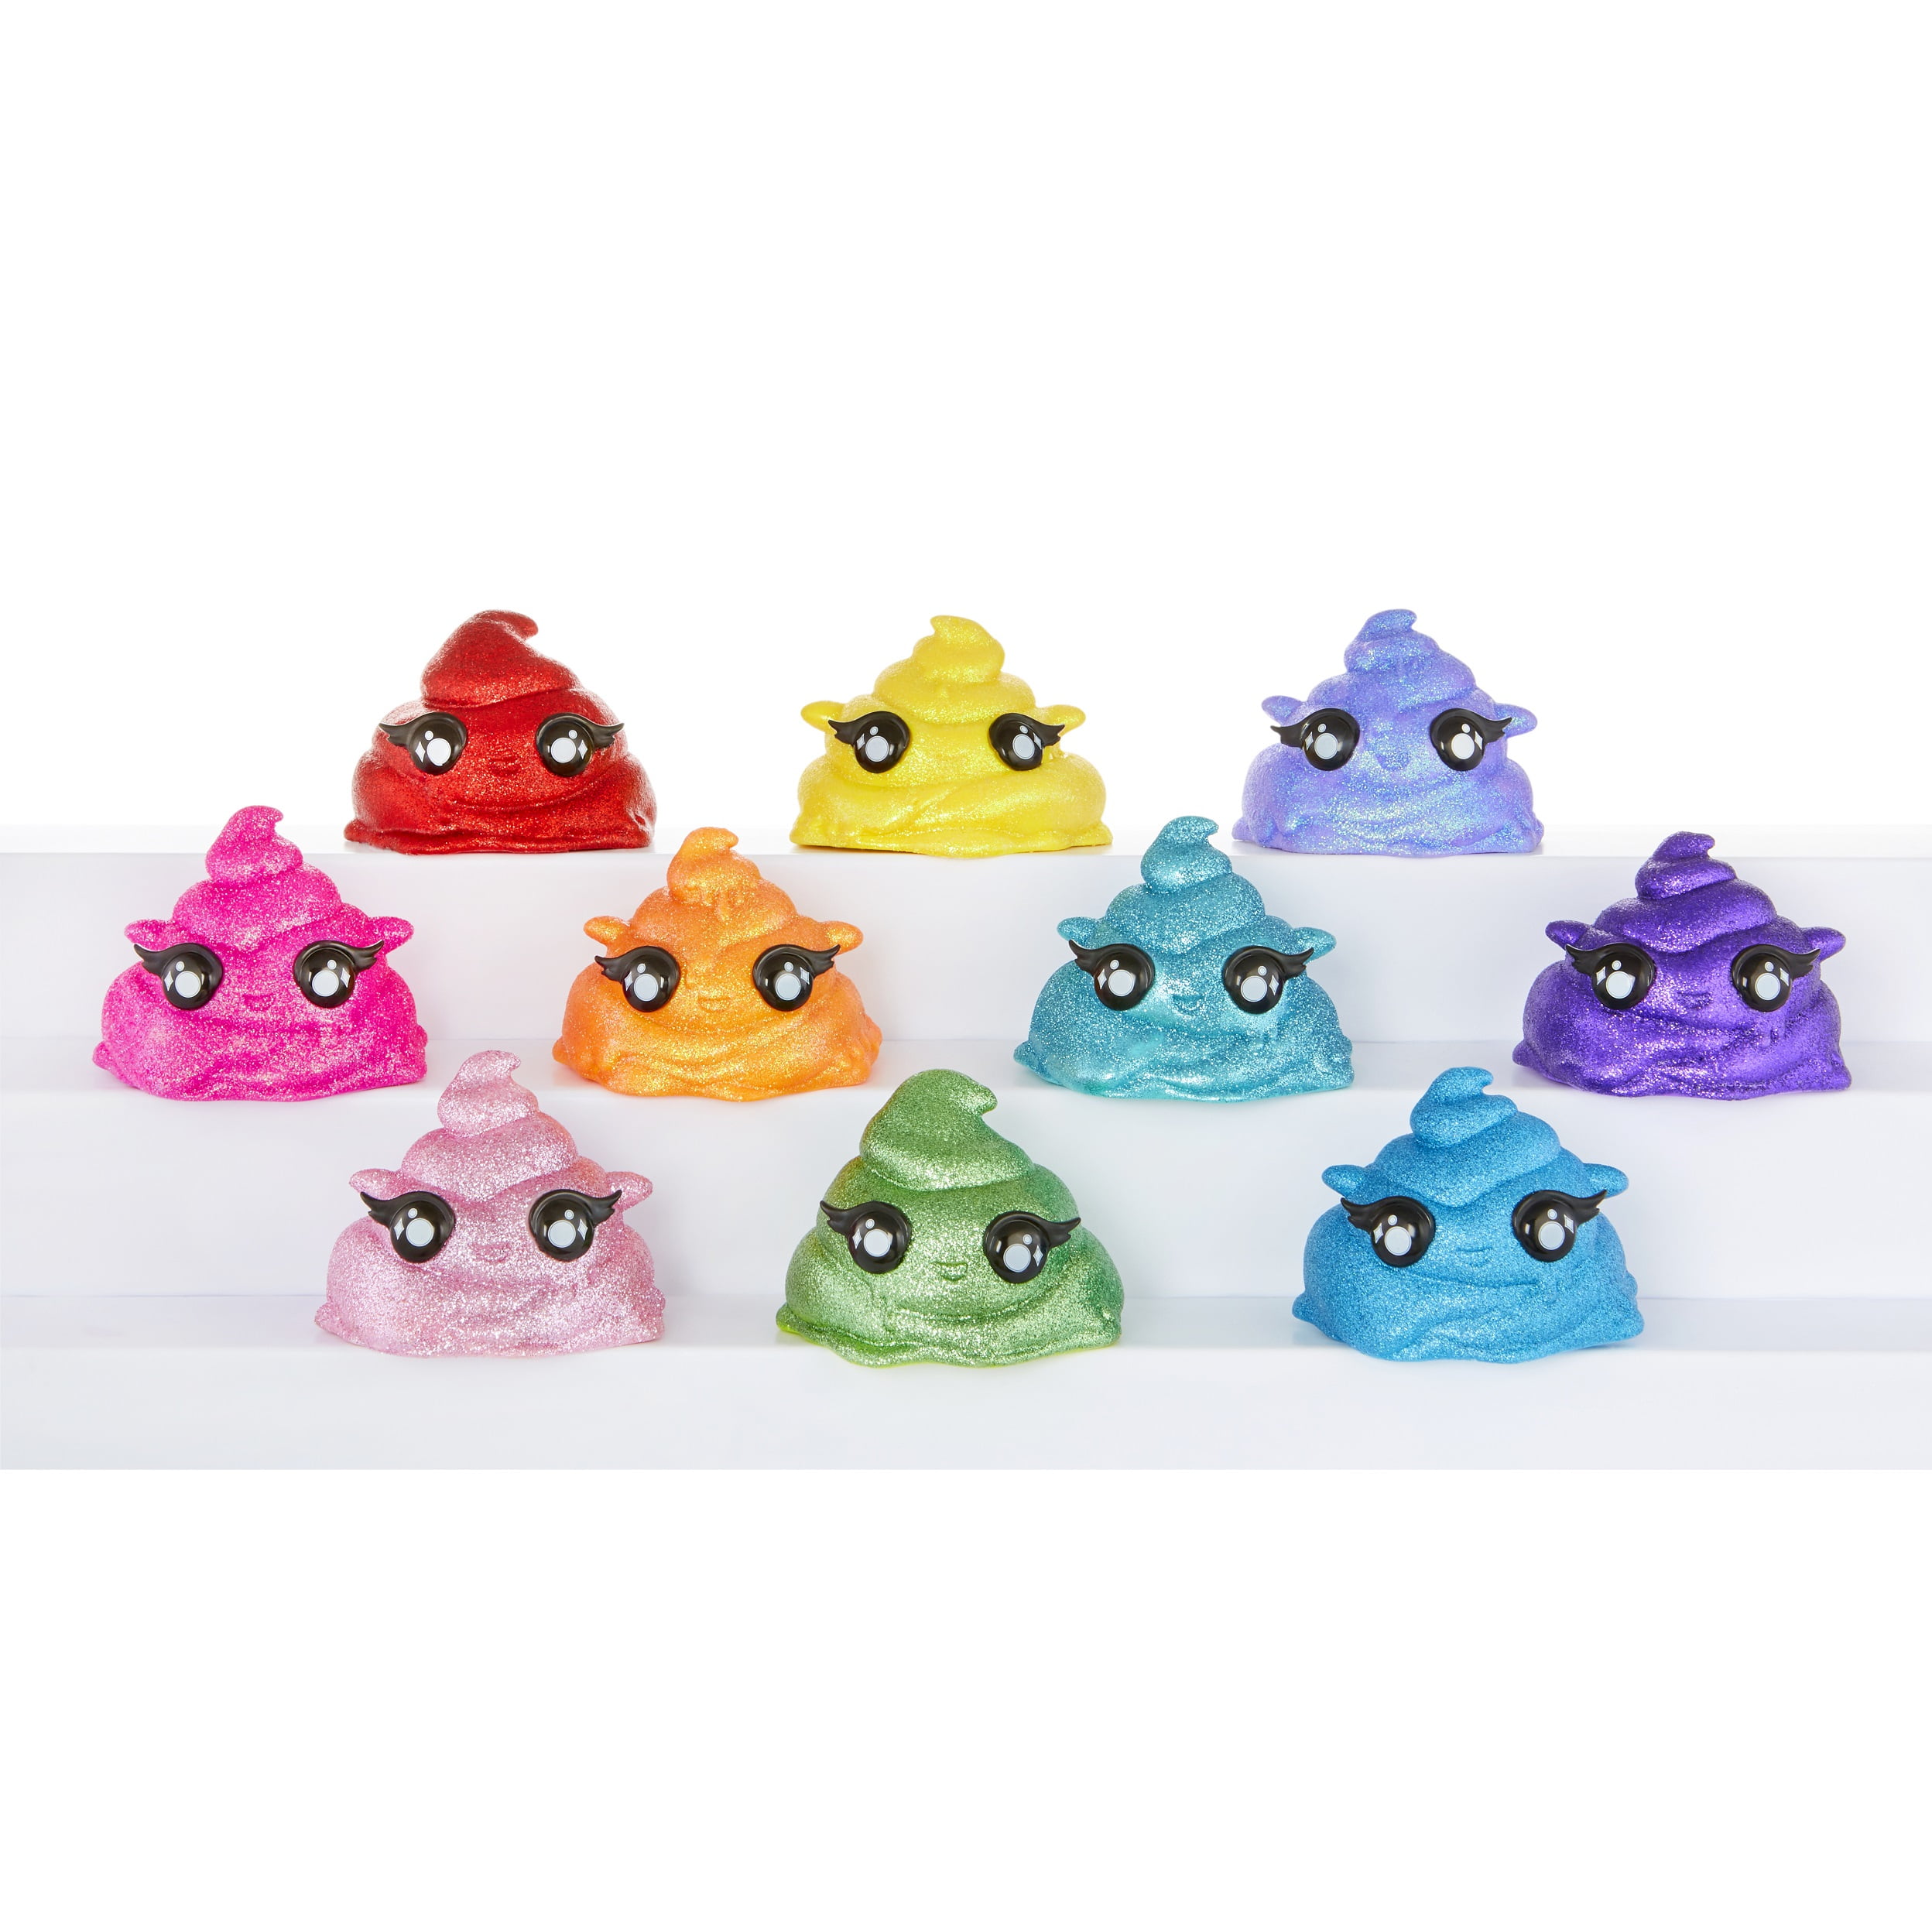 1 X poopsie cutie tooties Surprise Slime Toy Collectible NEW 